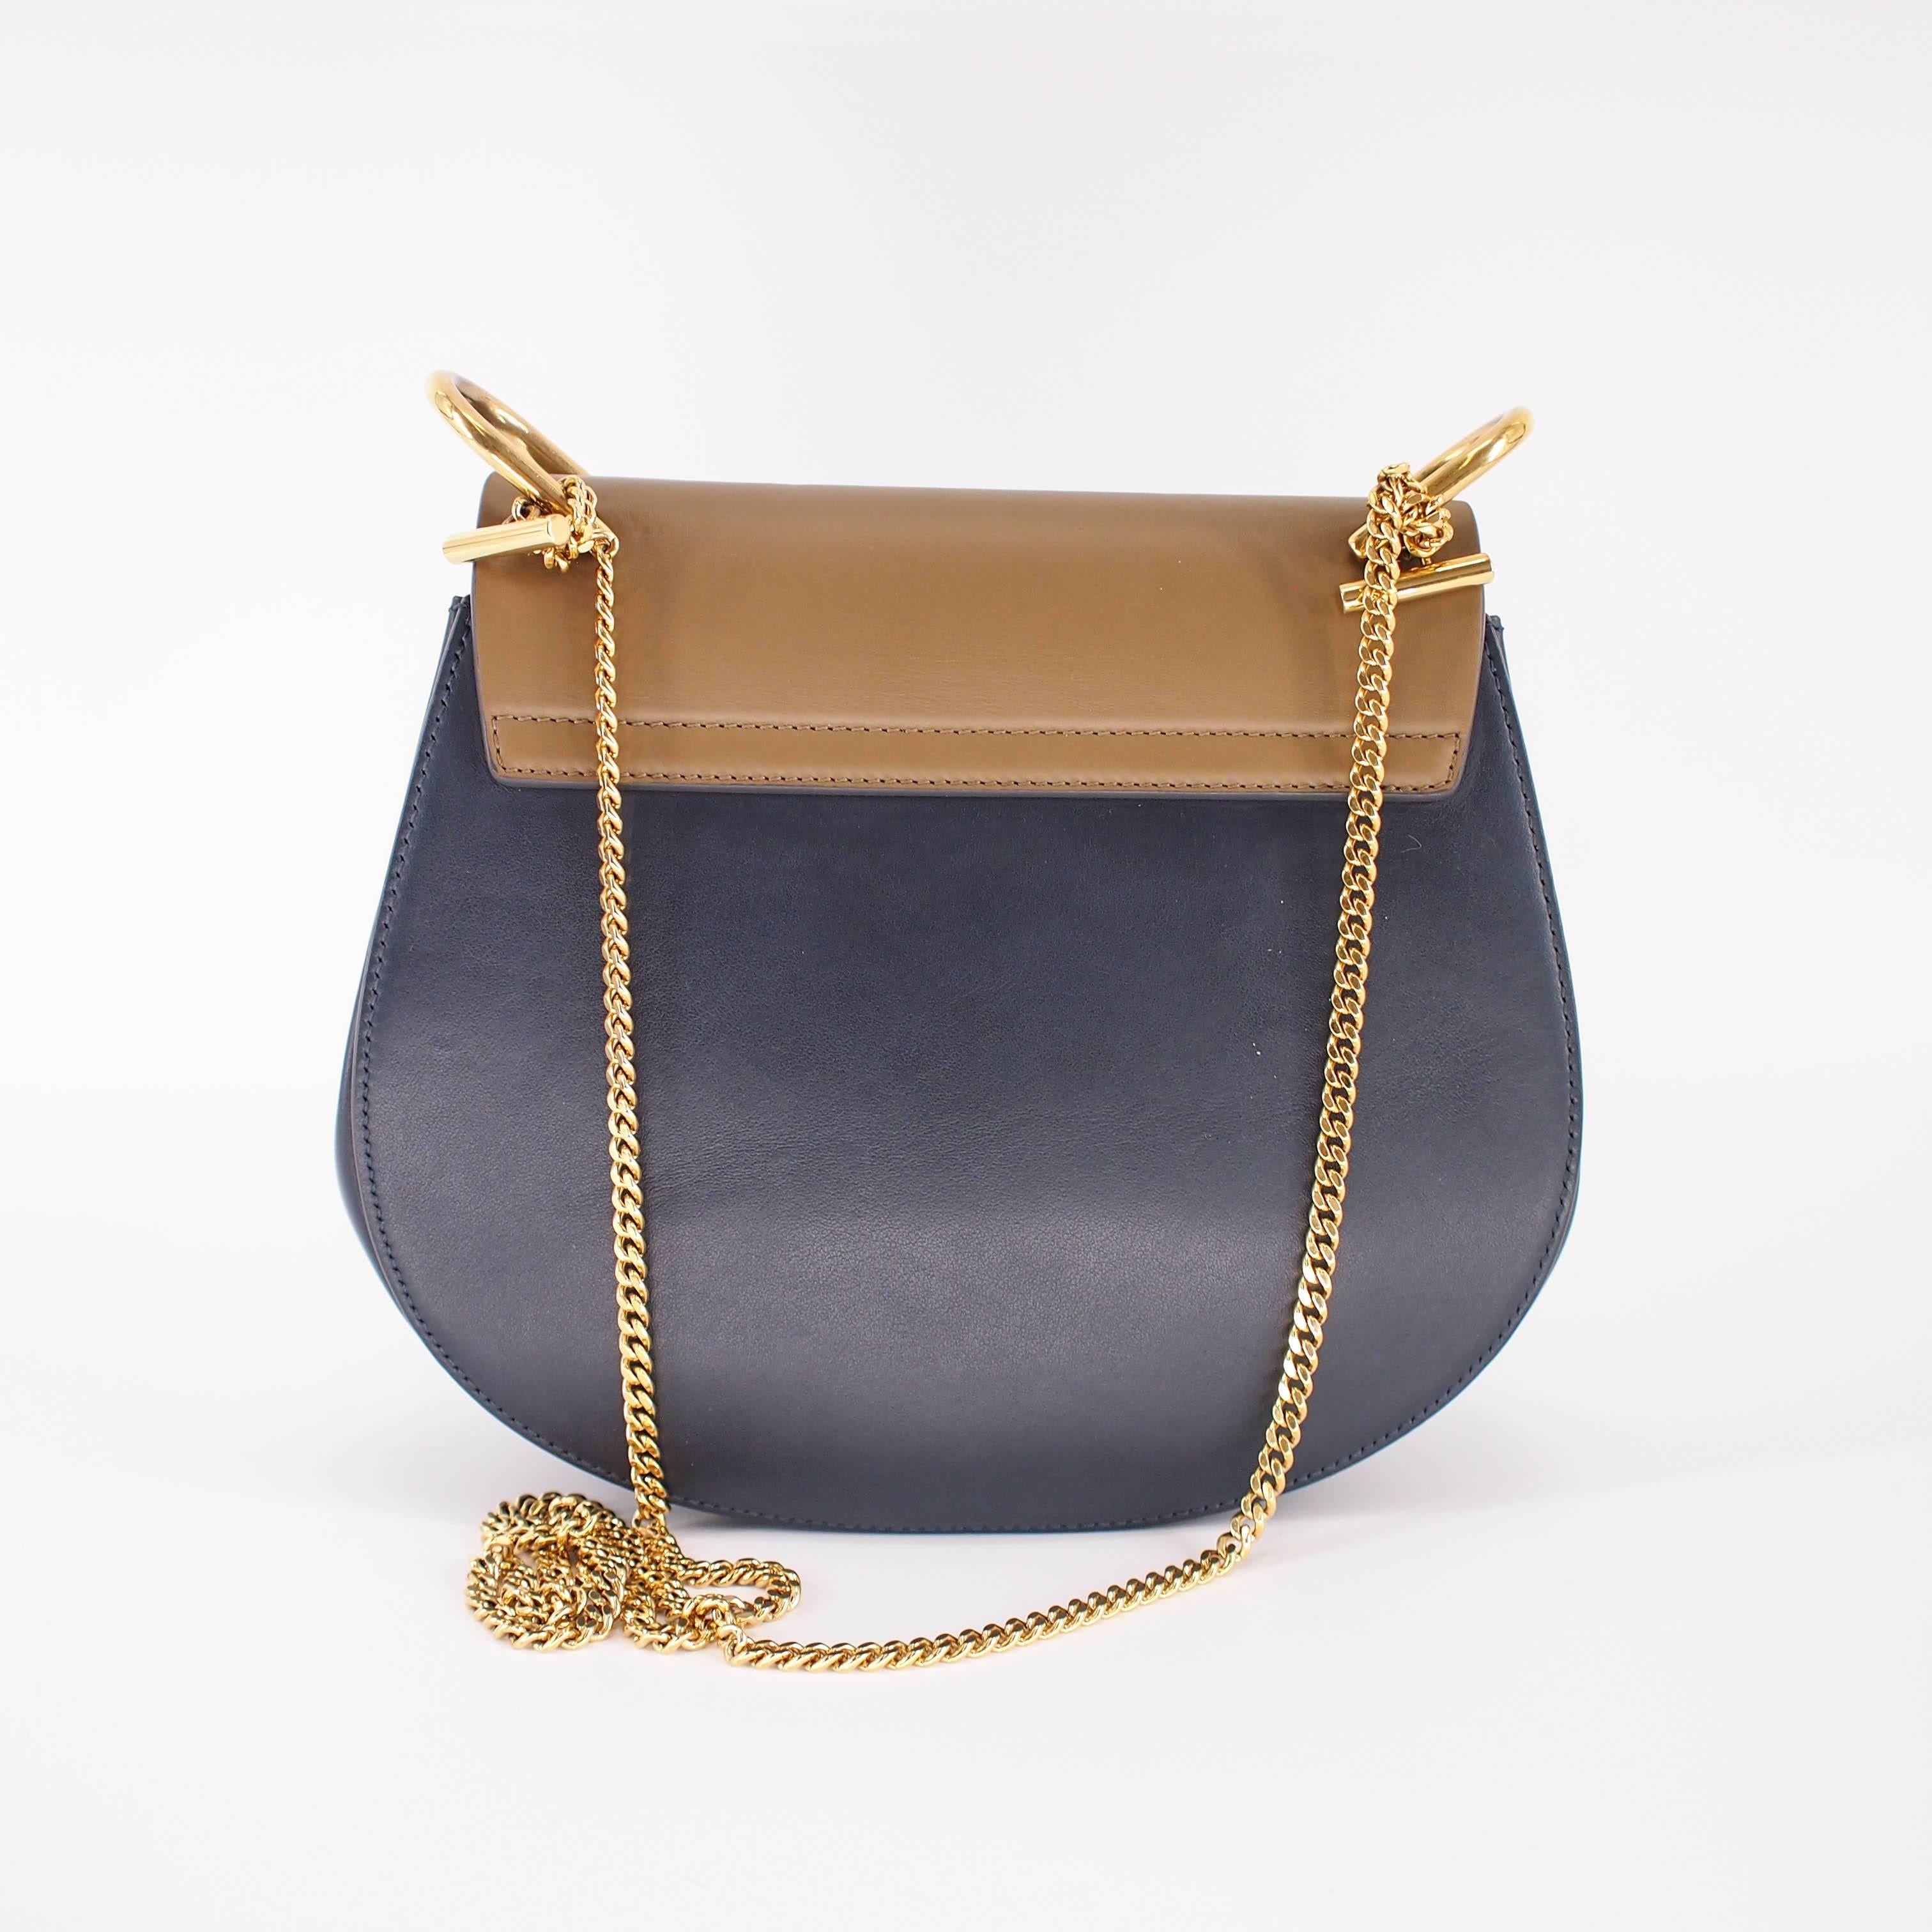 Black Chloe Medium Drew Shoulder Bag in Tri Colour Leather and Suede w/ Gold Hardware For Sale